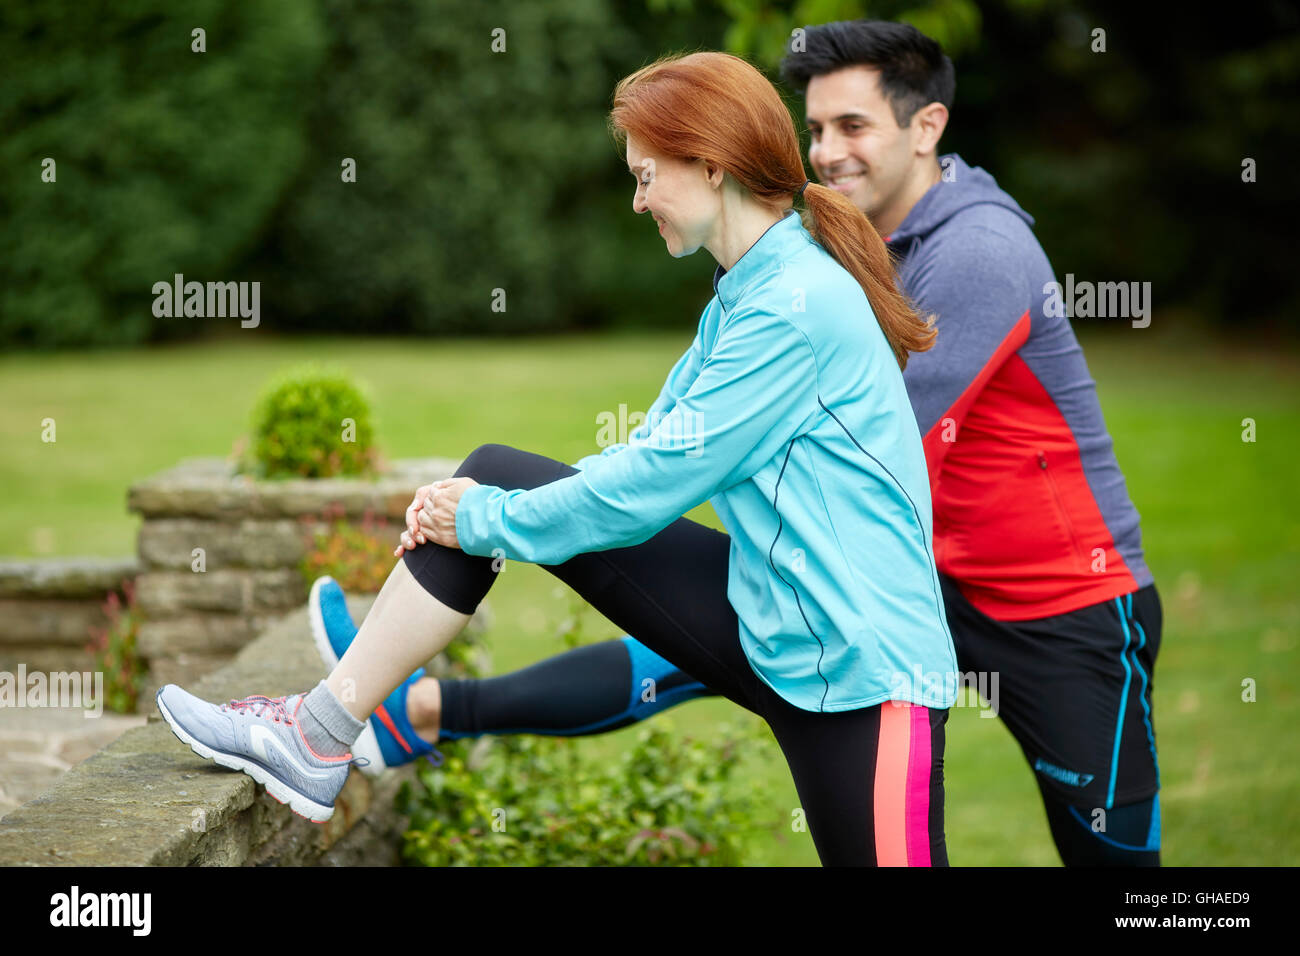 Couple stretching warming up together Stock Photo